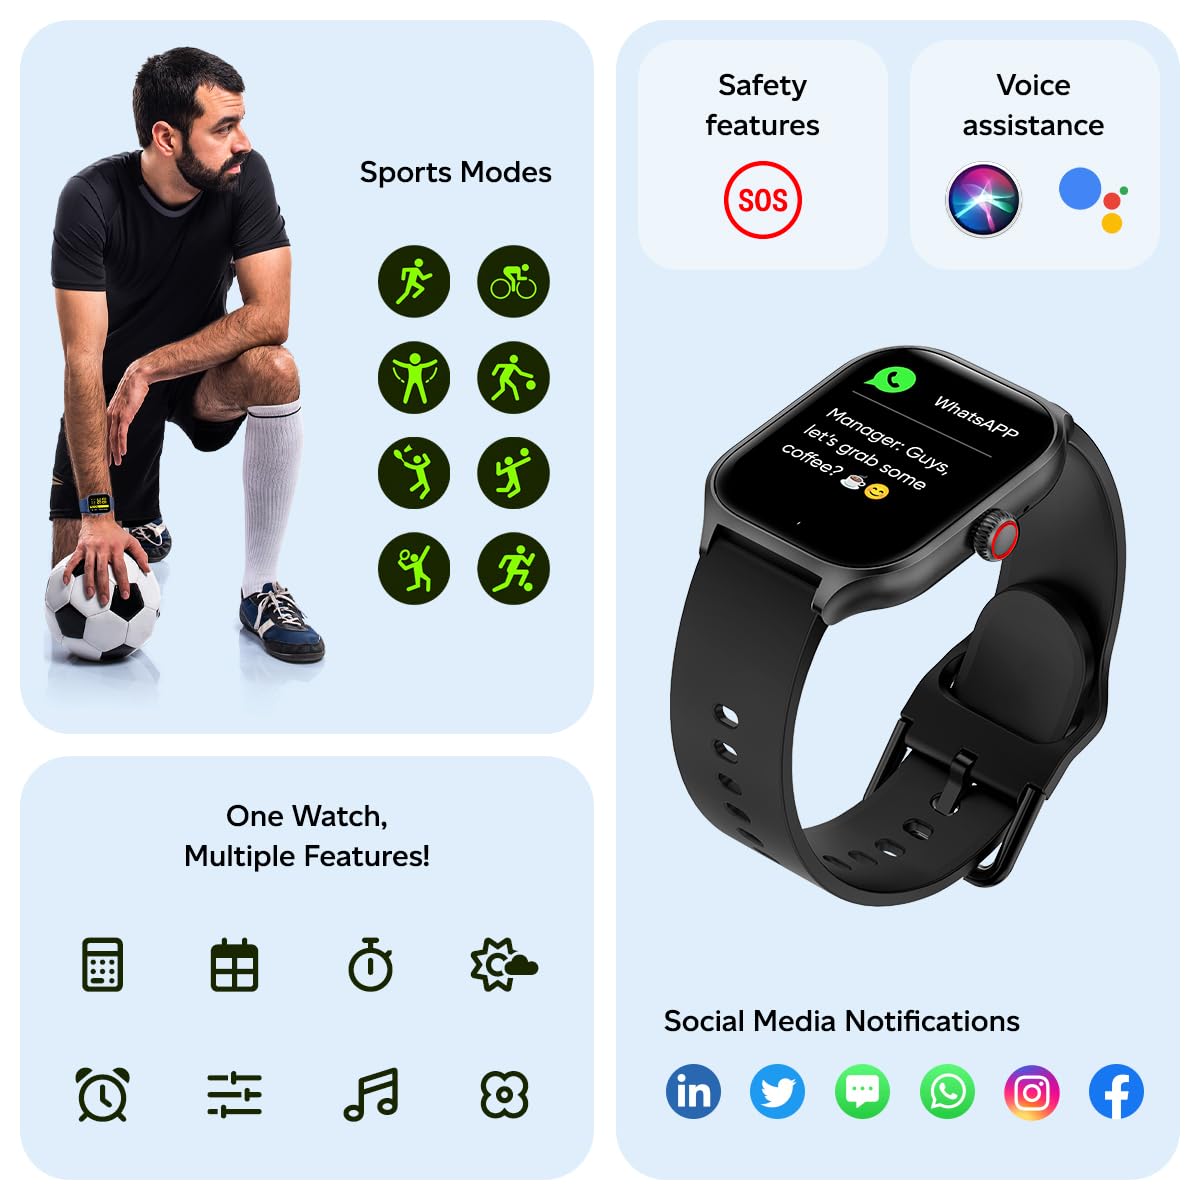 pTron Newly Launched Reflect MaxPro 2.01 inch Square Dial Smartwatch, Full Touch Display, Bluetooth Calling, Functional Crown, 600 NITS, 100+ Watch Faces, HR, SpO2, 5 Days Battery Life & IP68 (Black)